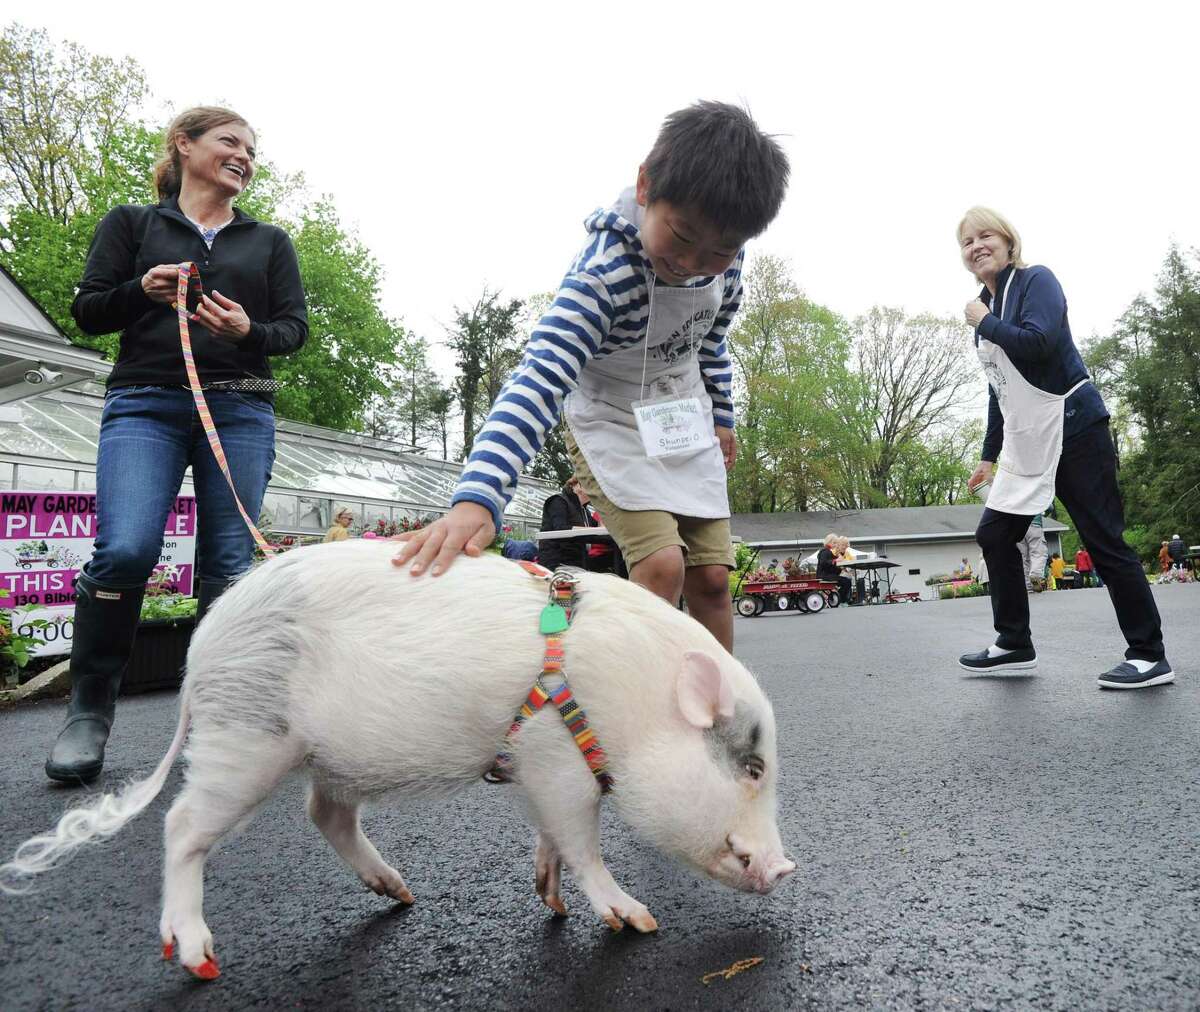 Margery Scotti of Greenwich, left, walks her pet rescue pig Milo as Shunpei Oura, 10, pets Milo during the 56th annual May Gardener's Market organized by the Garden Education Center of Greenwich at the Montgomery Pinetum in the Cos Cob section of Greenwich, Conn., Saturday, May 6, 2017. Officials at the event said the proceeds from the market will go toward the Garden Educatiin Center's educational & senior outreach programs.